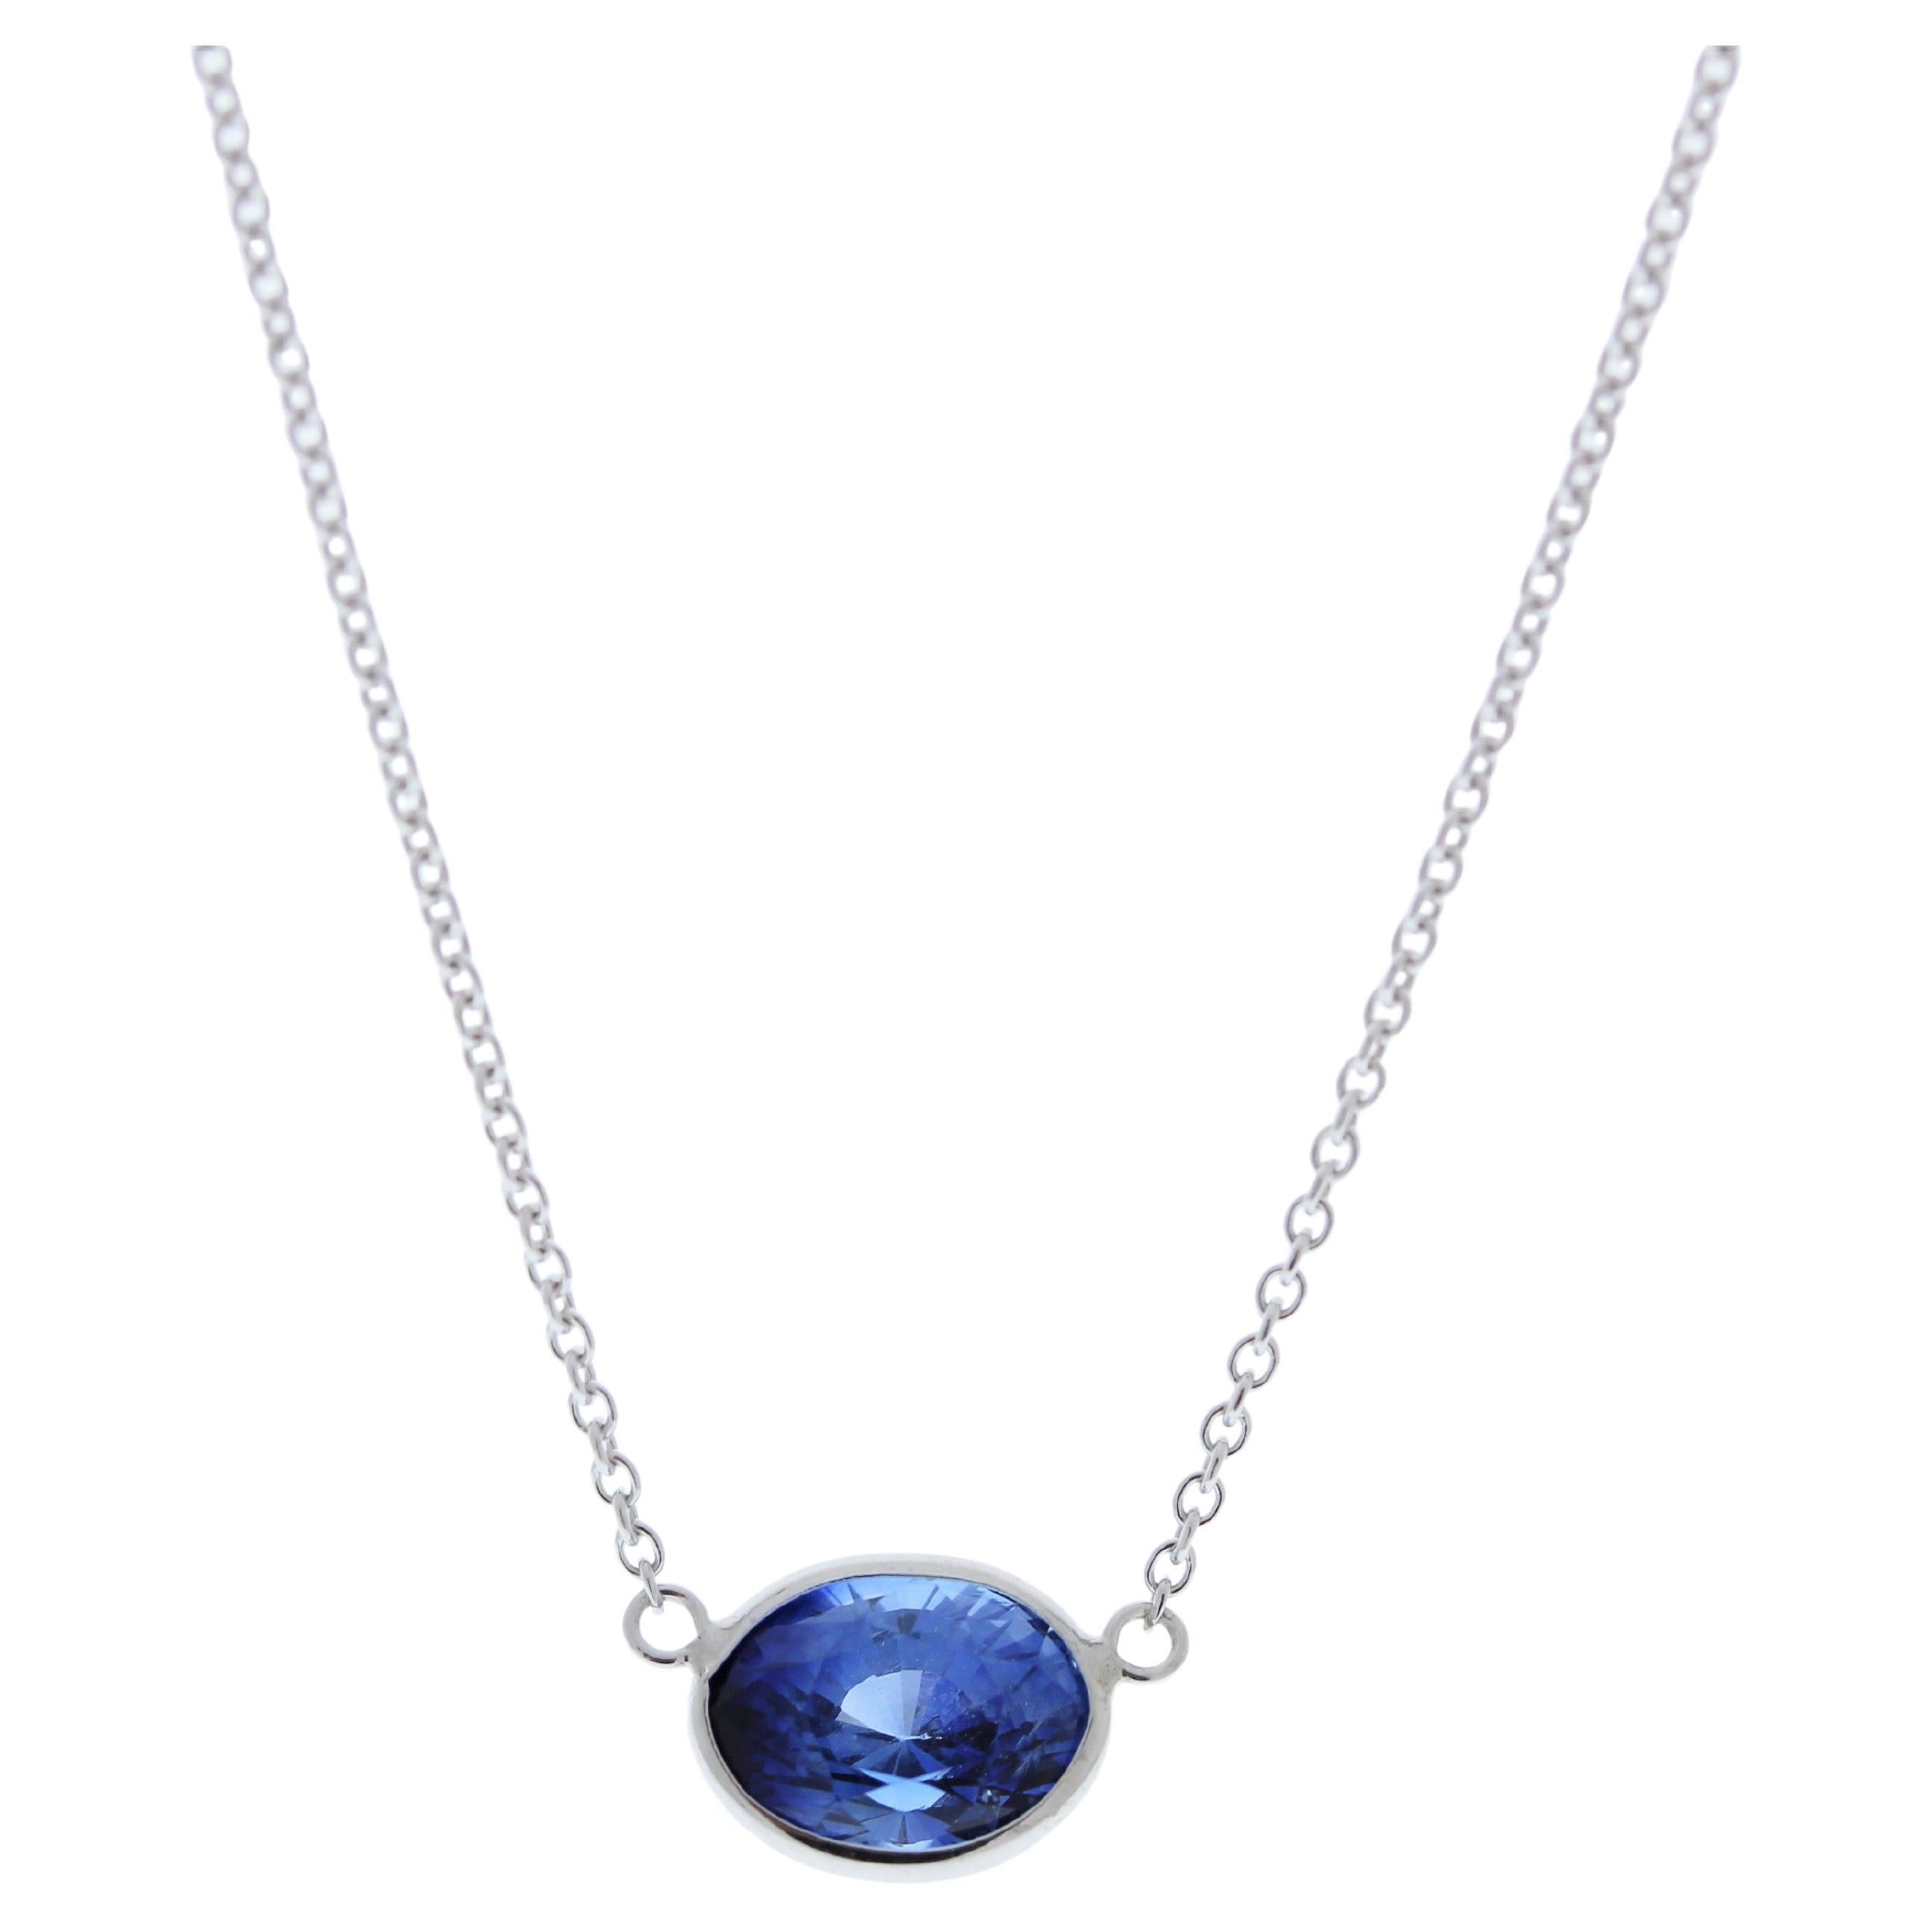 2.89 Carat Oval Sapphire Blue Fashion Necklaces In 14k White Gold For Sale